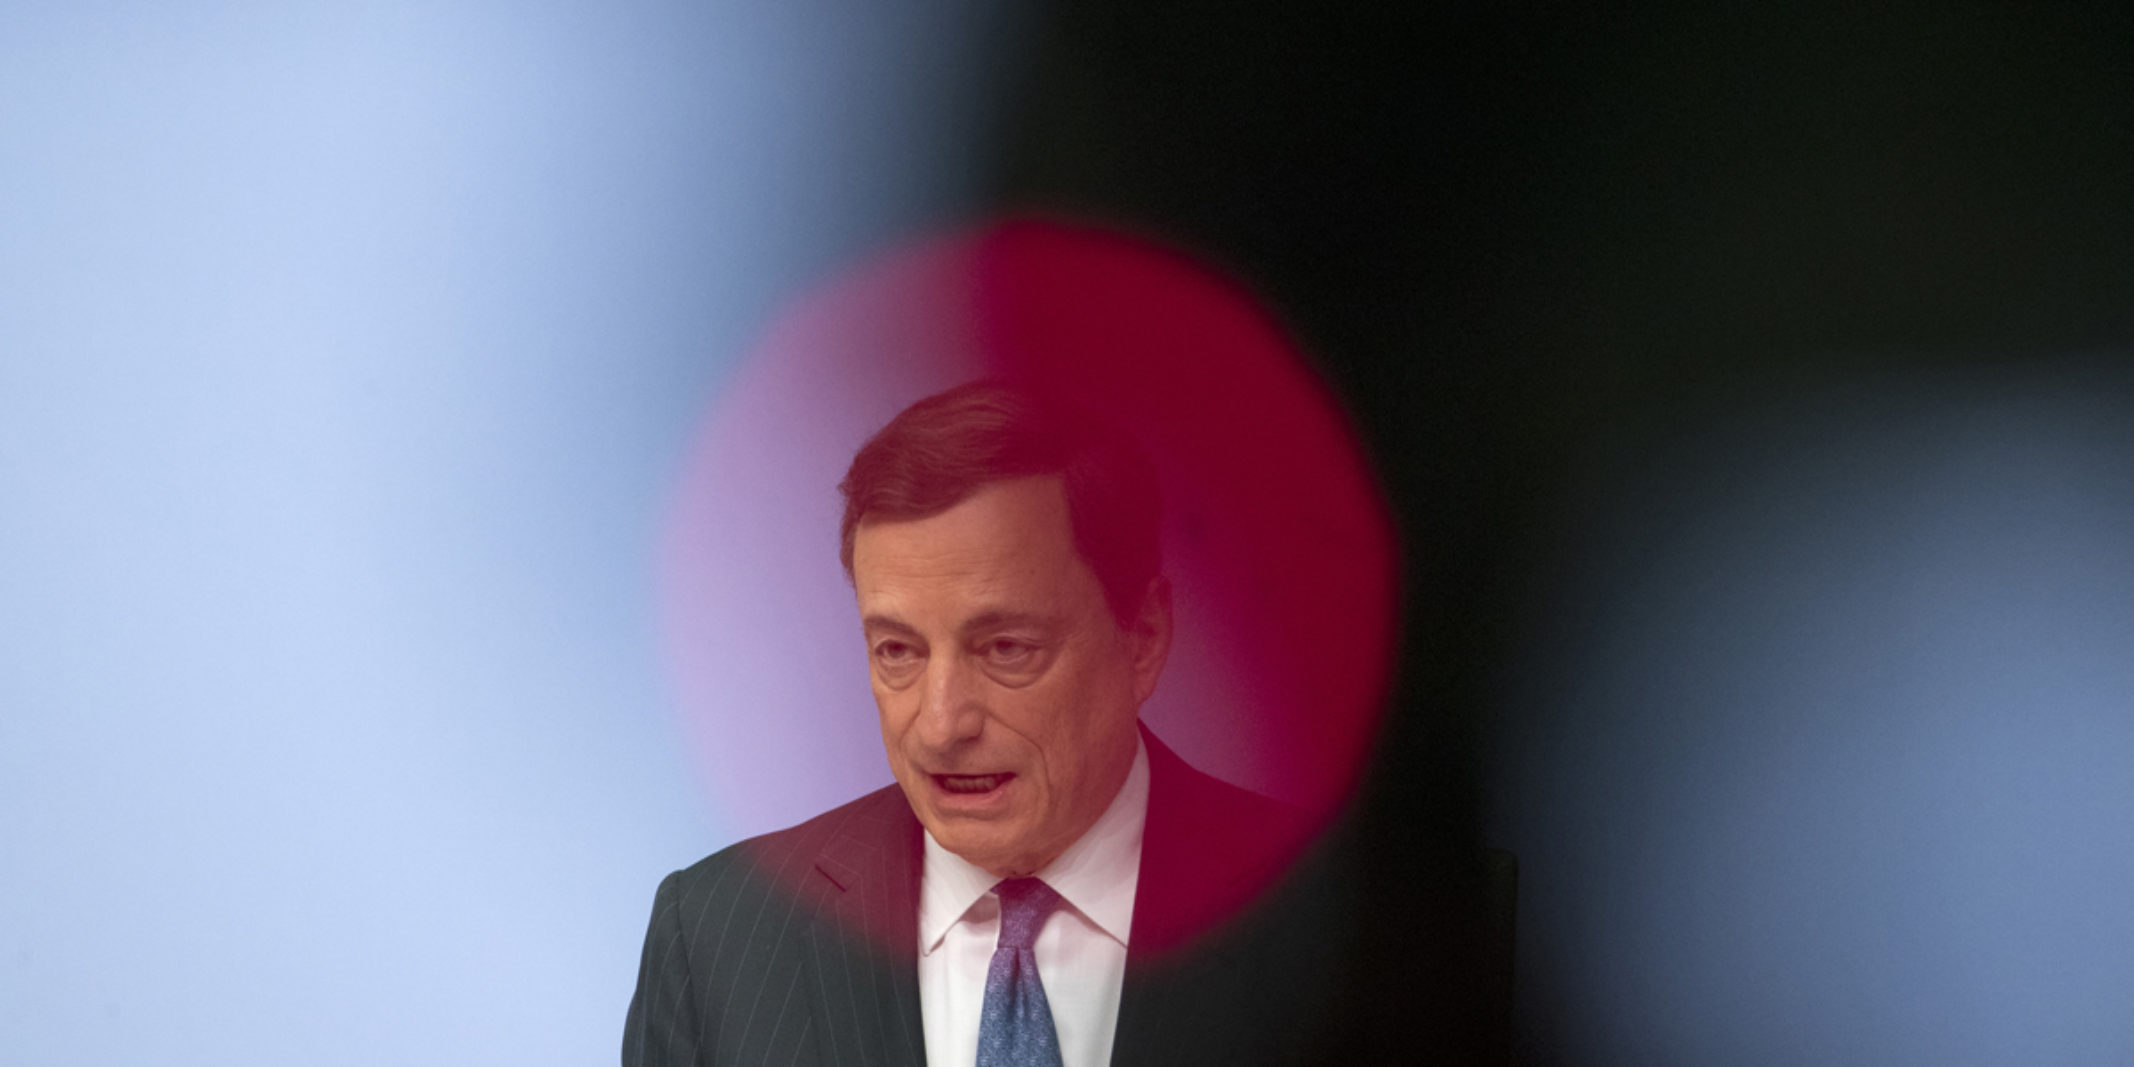 Picture of Mario Draghi giving a speech with a red circle over his him